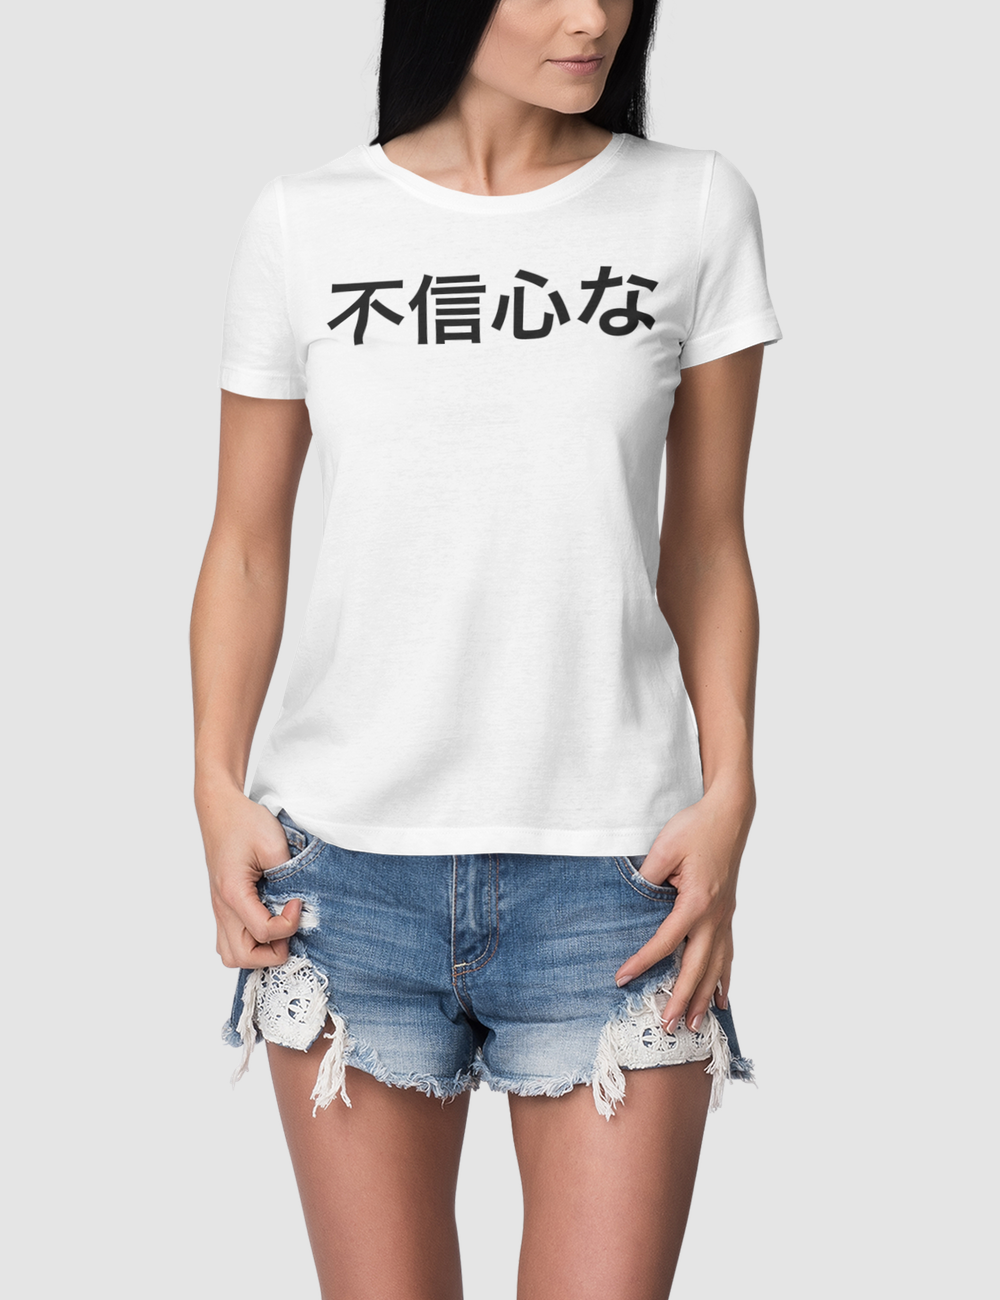 Ungodly | Women's Fitted T-Shirt OniTakai